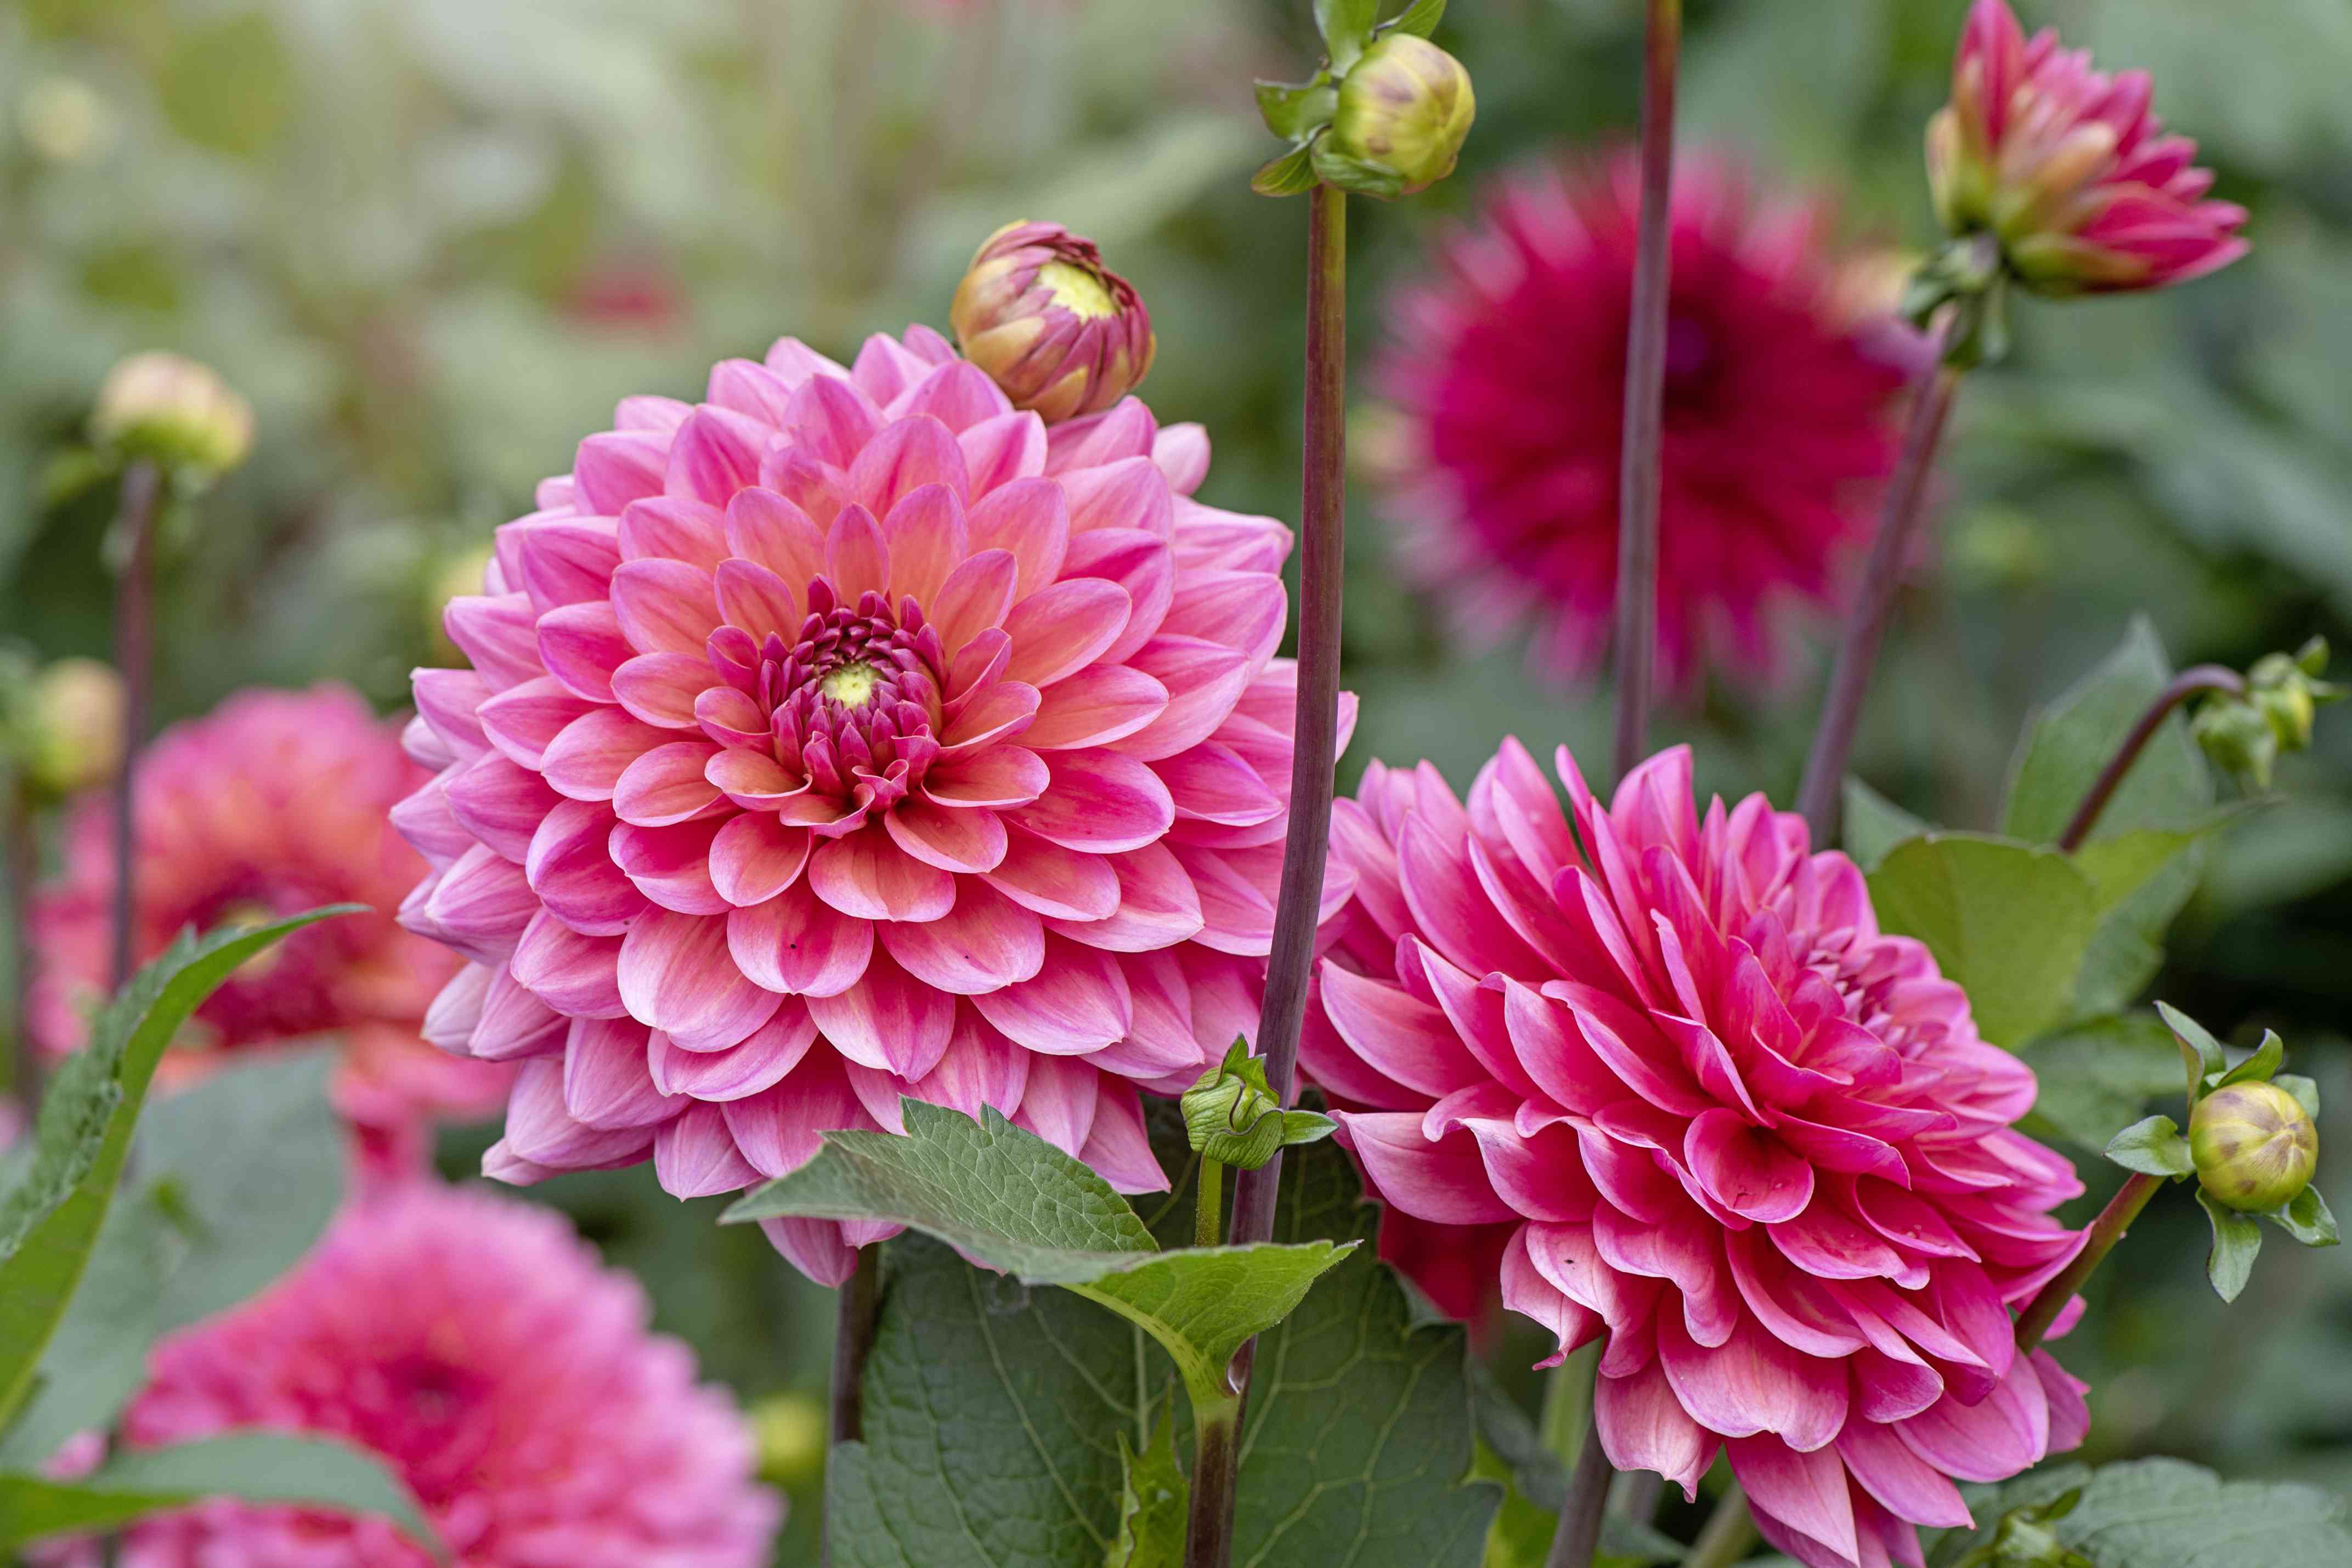 Are Dahlias Perennials or Annuals? We Share Everything You Need to Know